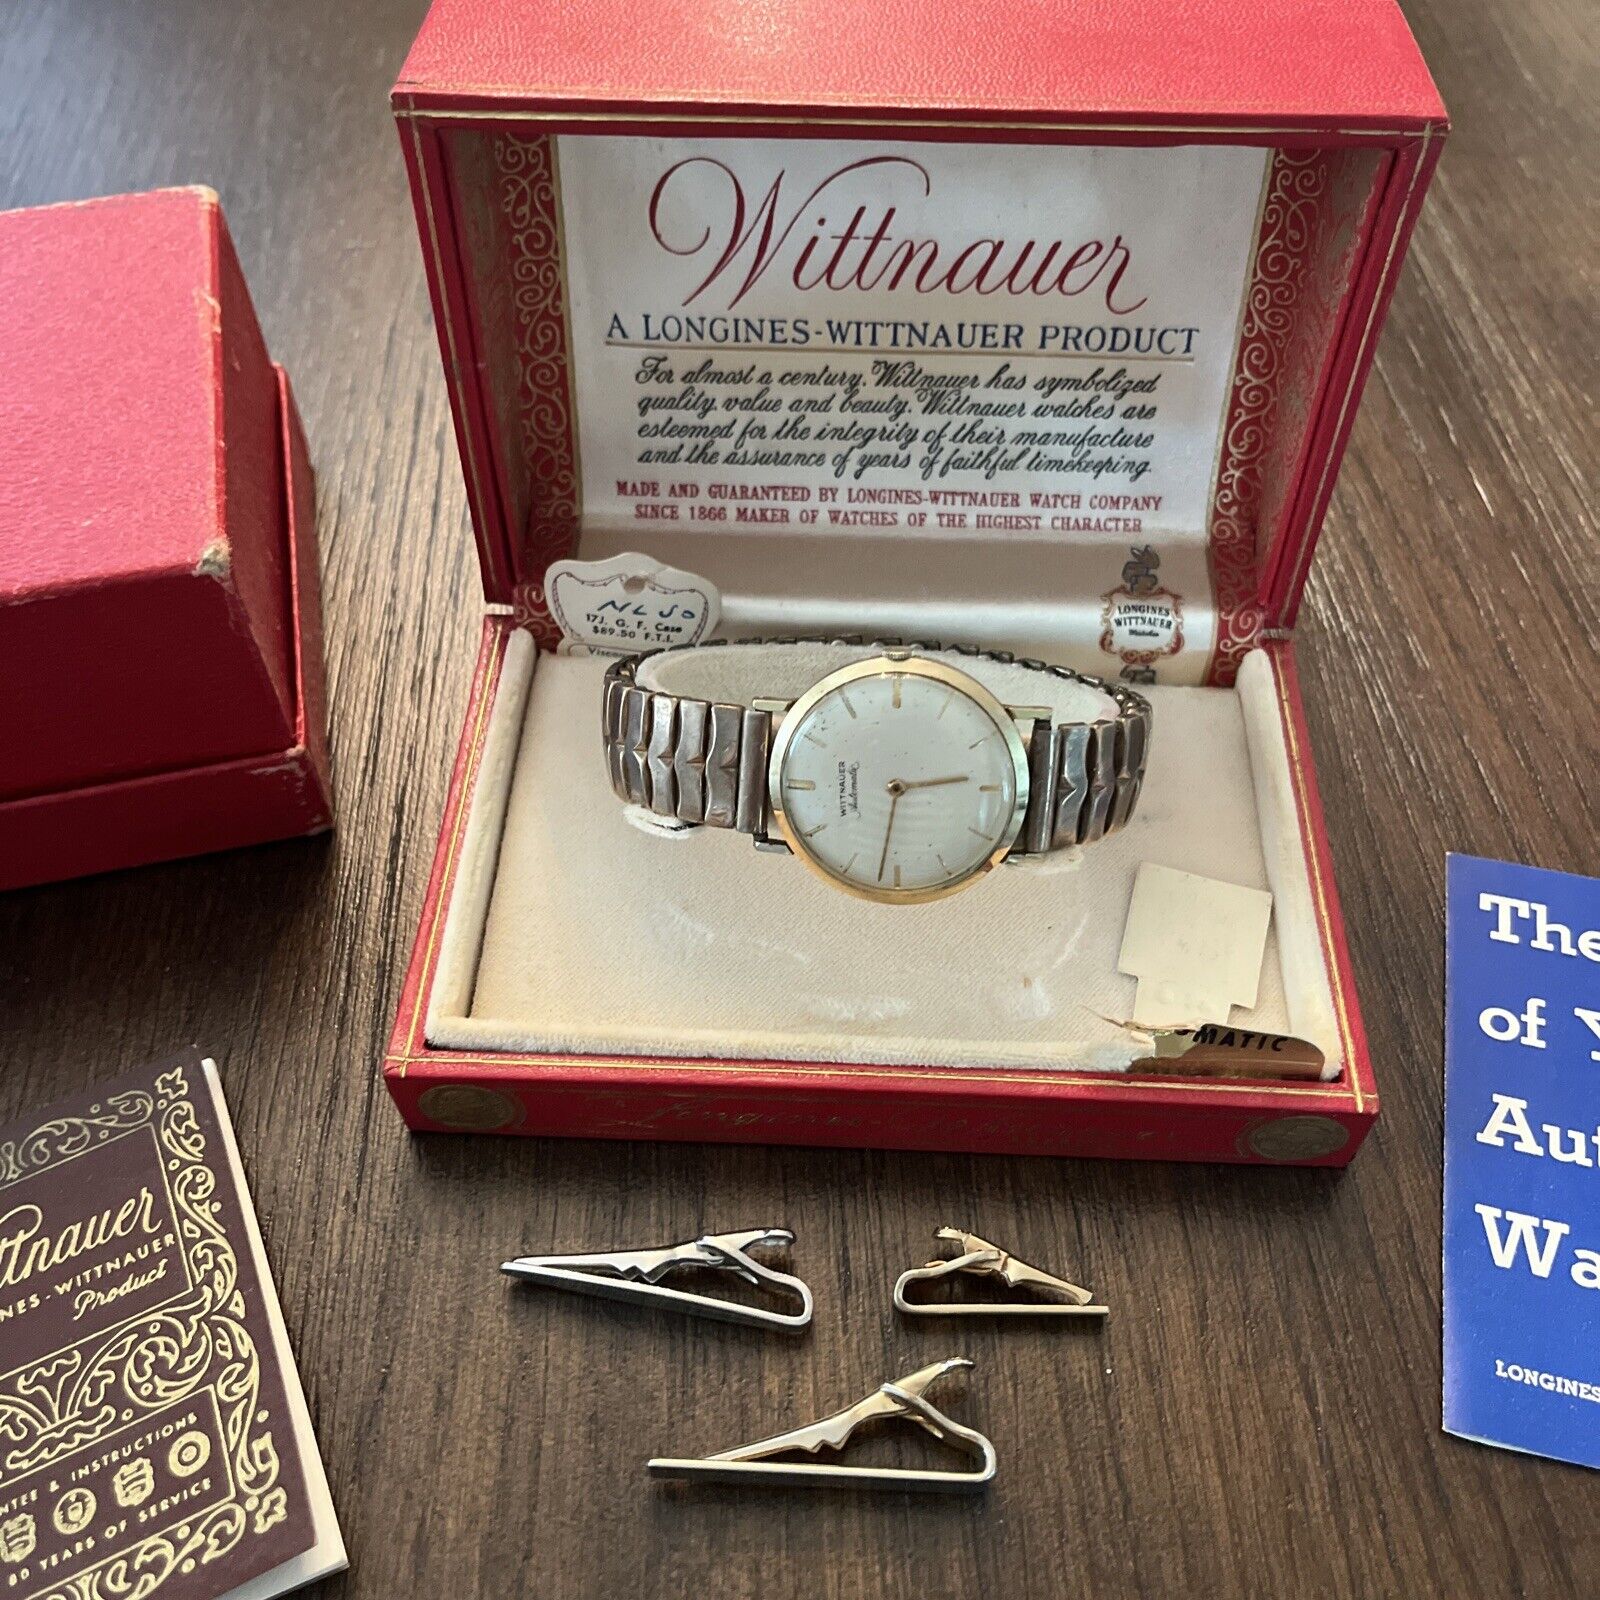 Vintage Mens Jewelry Lot Longines-Wittnauer Windup 10k GF Watch And More